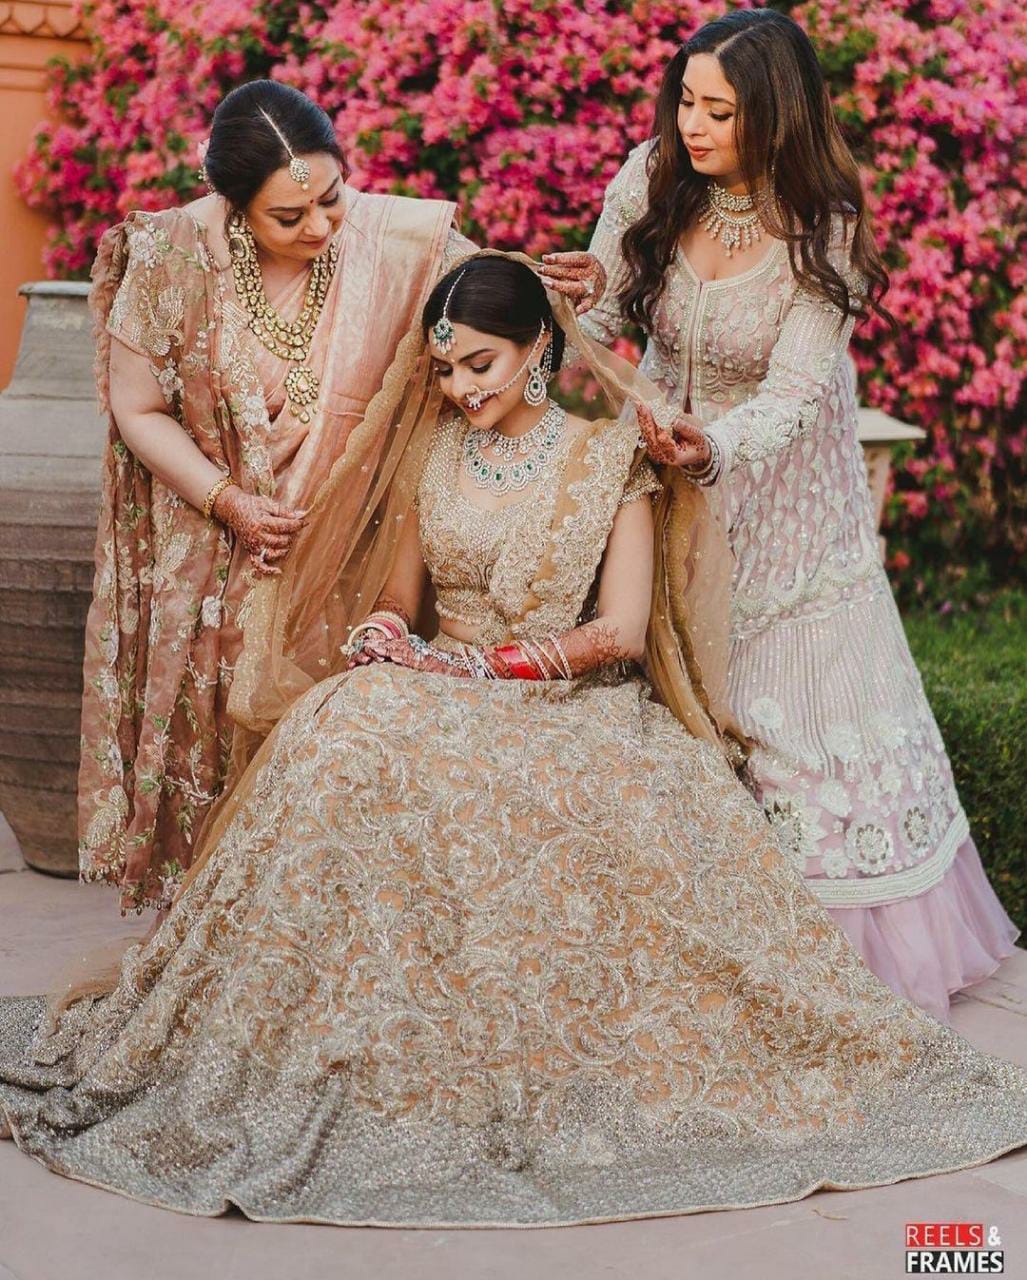 Top outfits you need for your Best Friend's Wedding